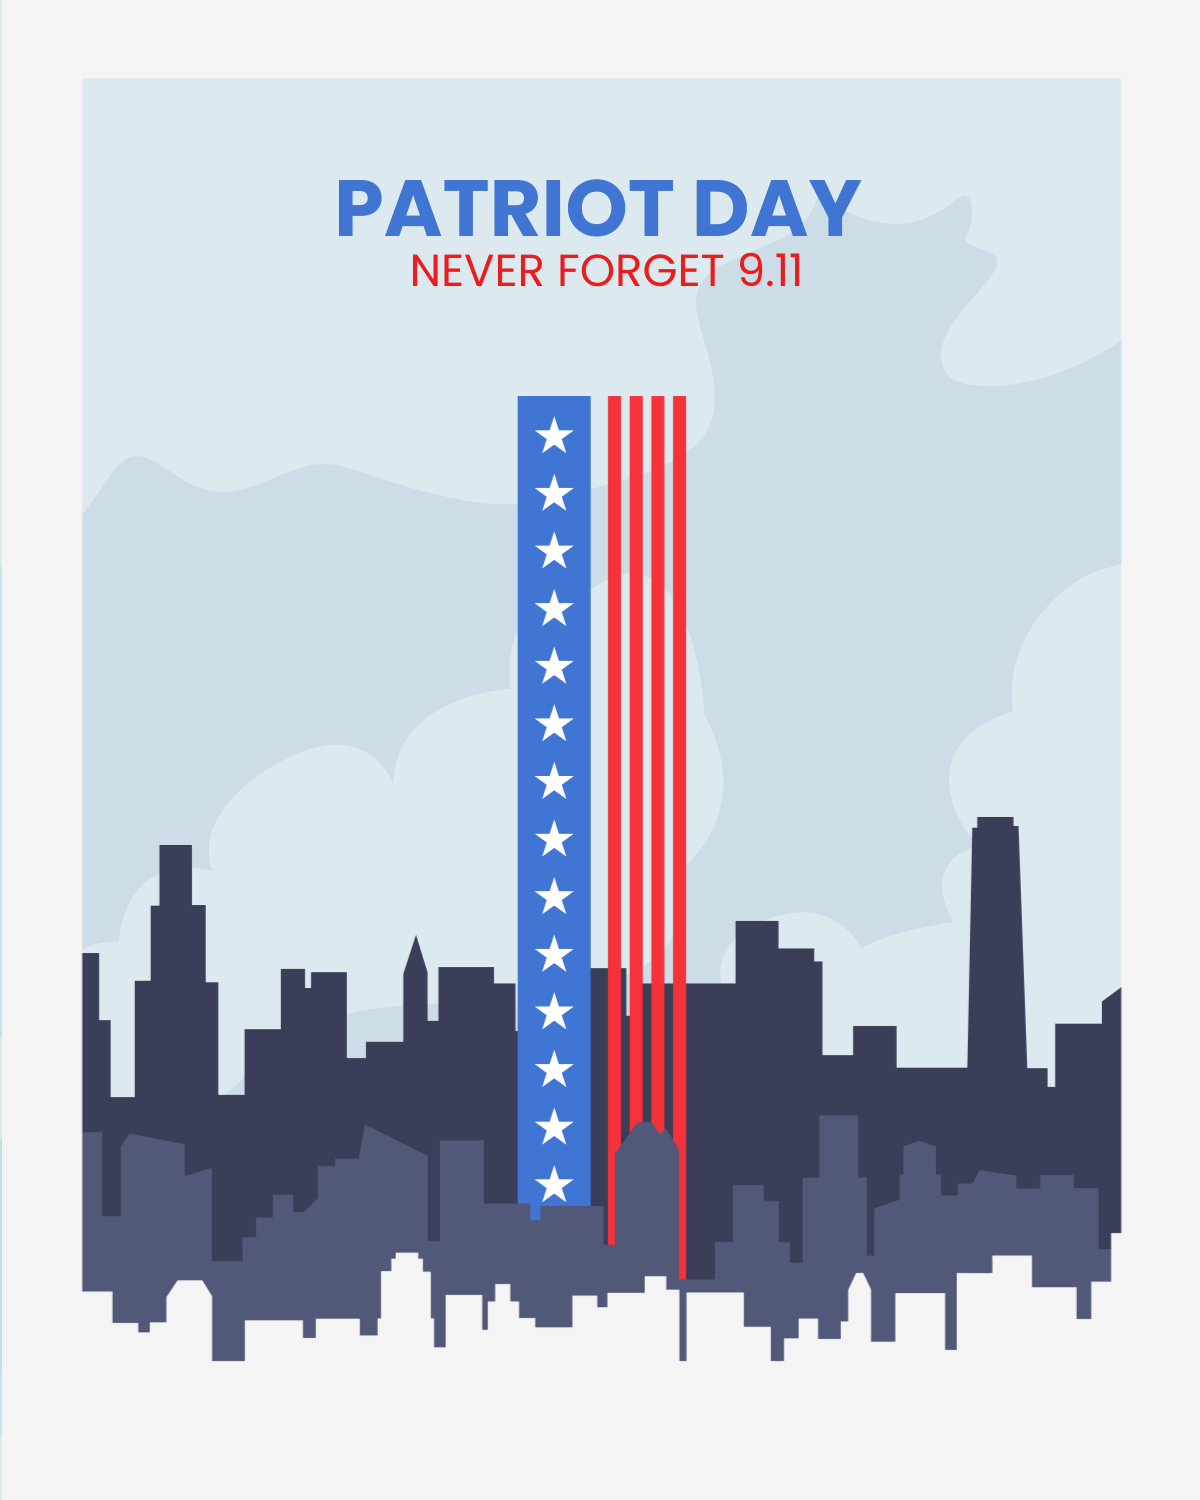 Patriot Day Facebook Post Template